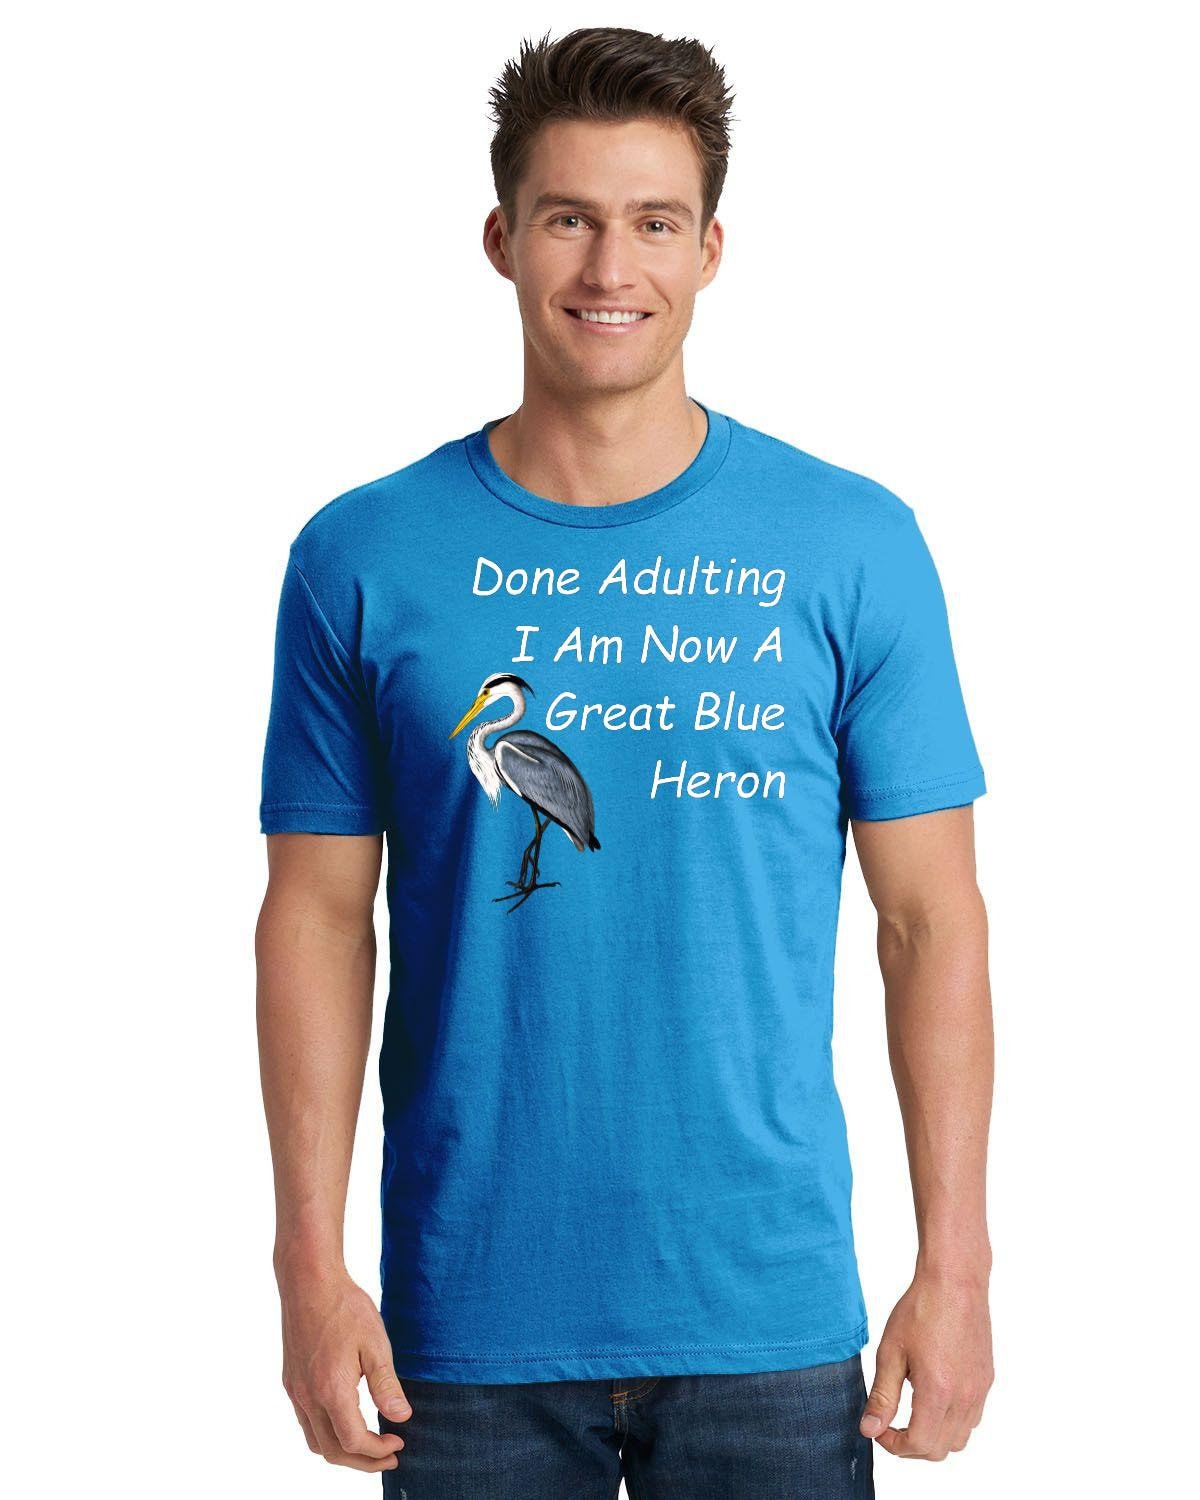 Done Adulting I am Now a Great Blue Heron Unisex Jersey Short Sleeve Tee Great Blue Heron Bird Watcher Birder Funny Quote